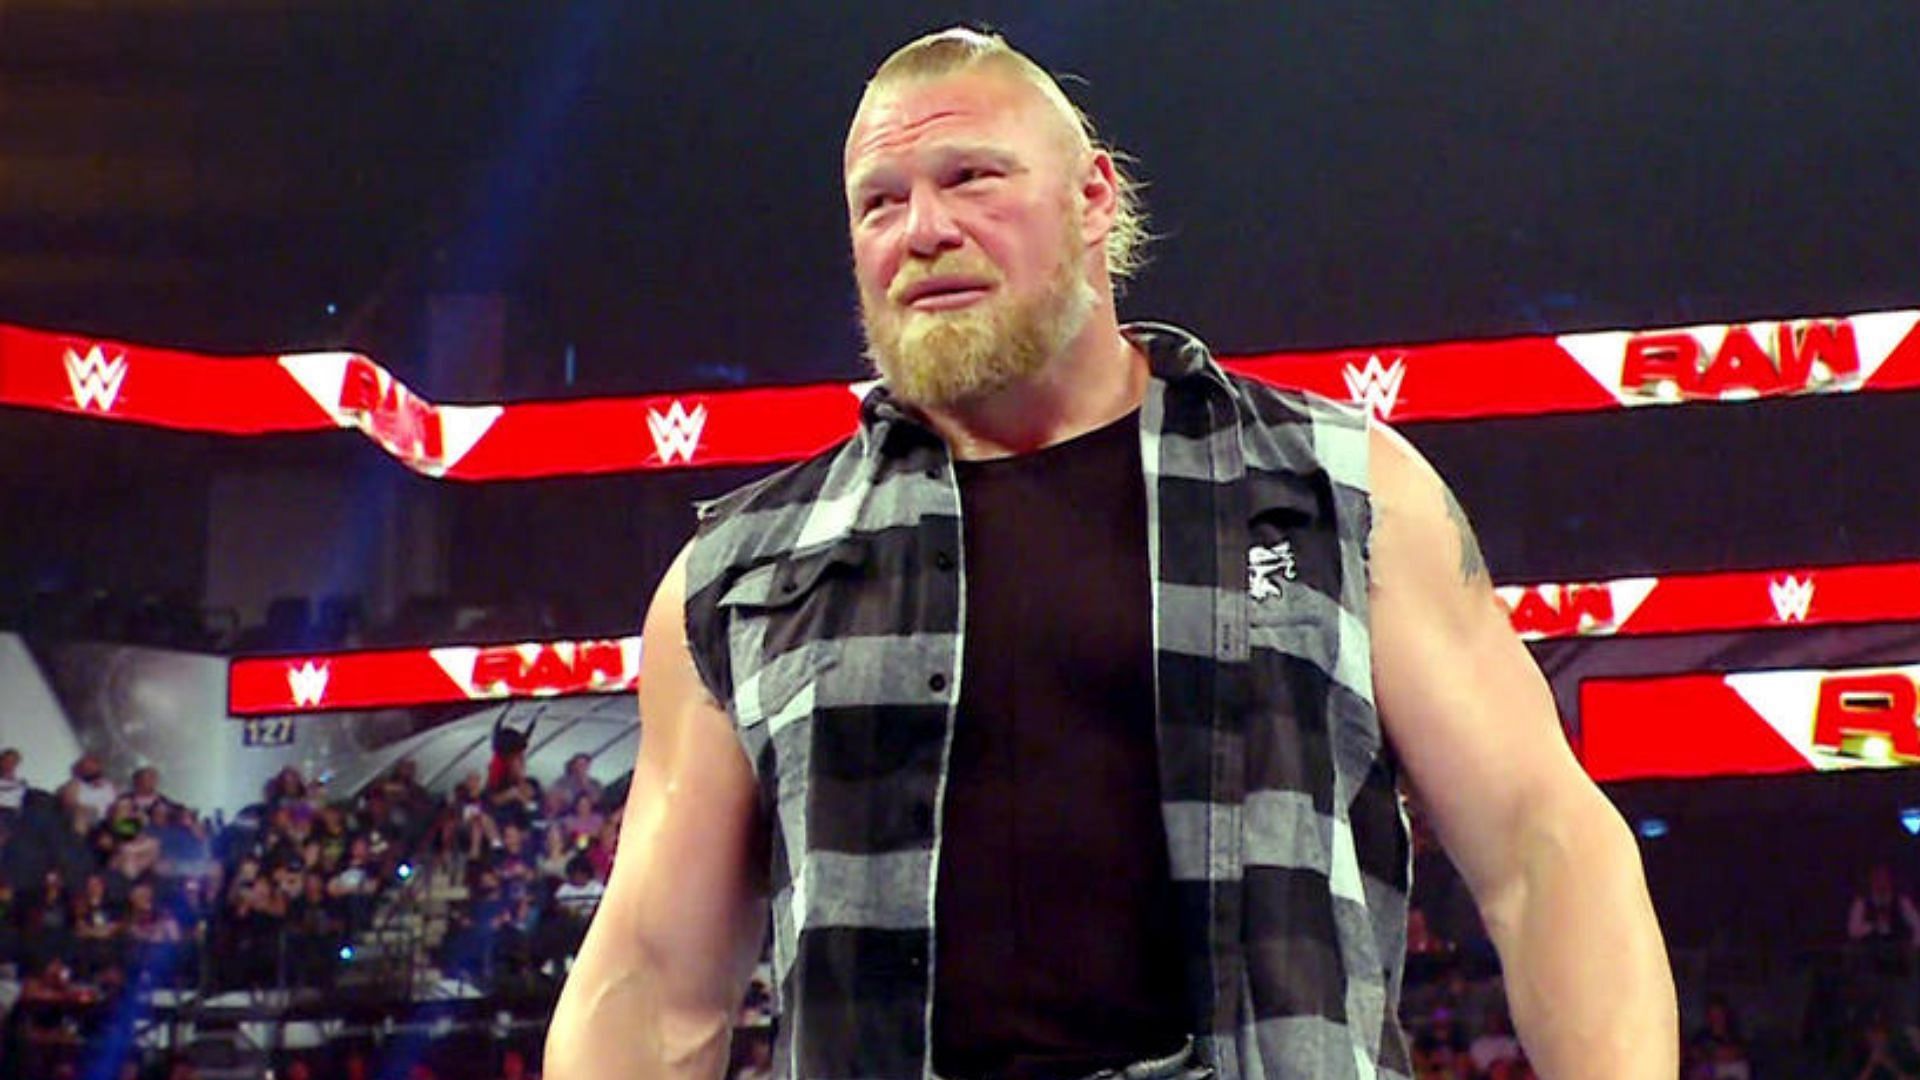 The Beast Incarnate will not be making his return to SmackDown tonight